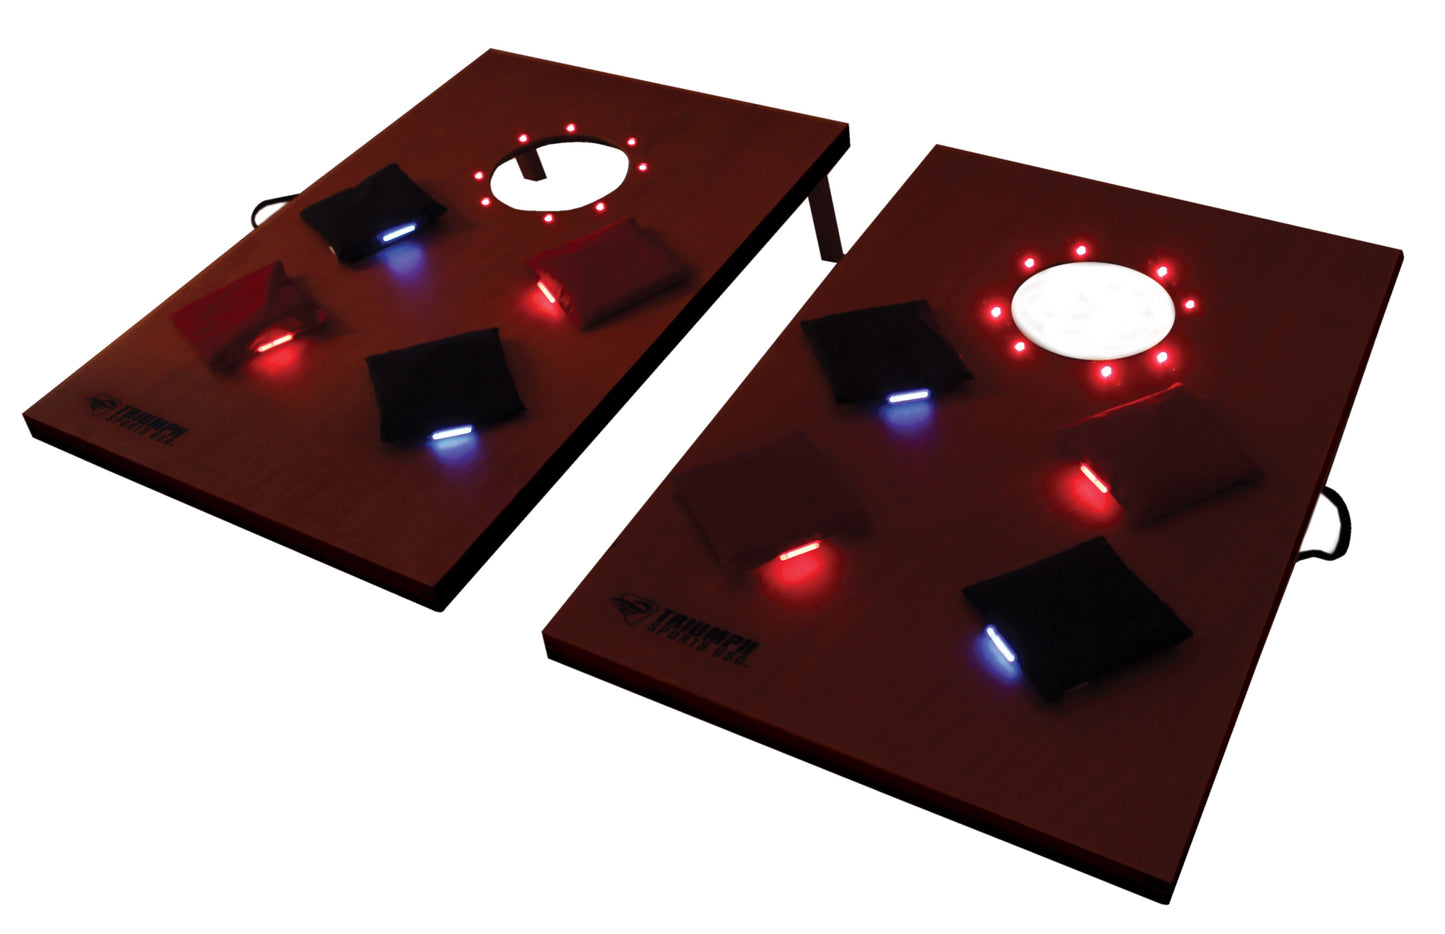 LED Lighted Tournament Bag Toss (Night Boards) - Glow in the dark!